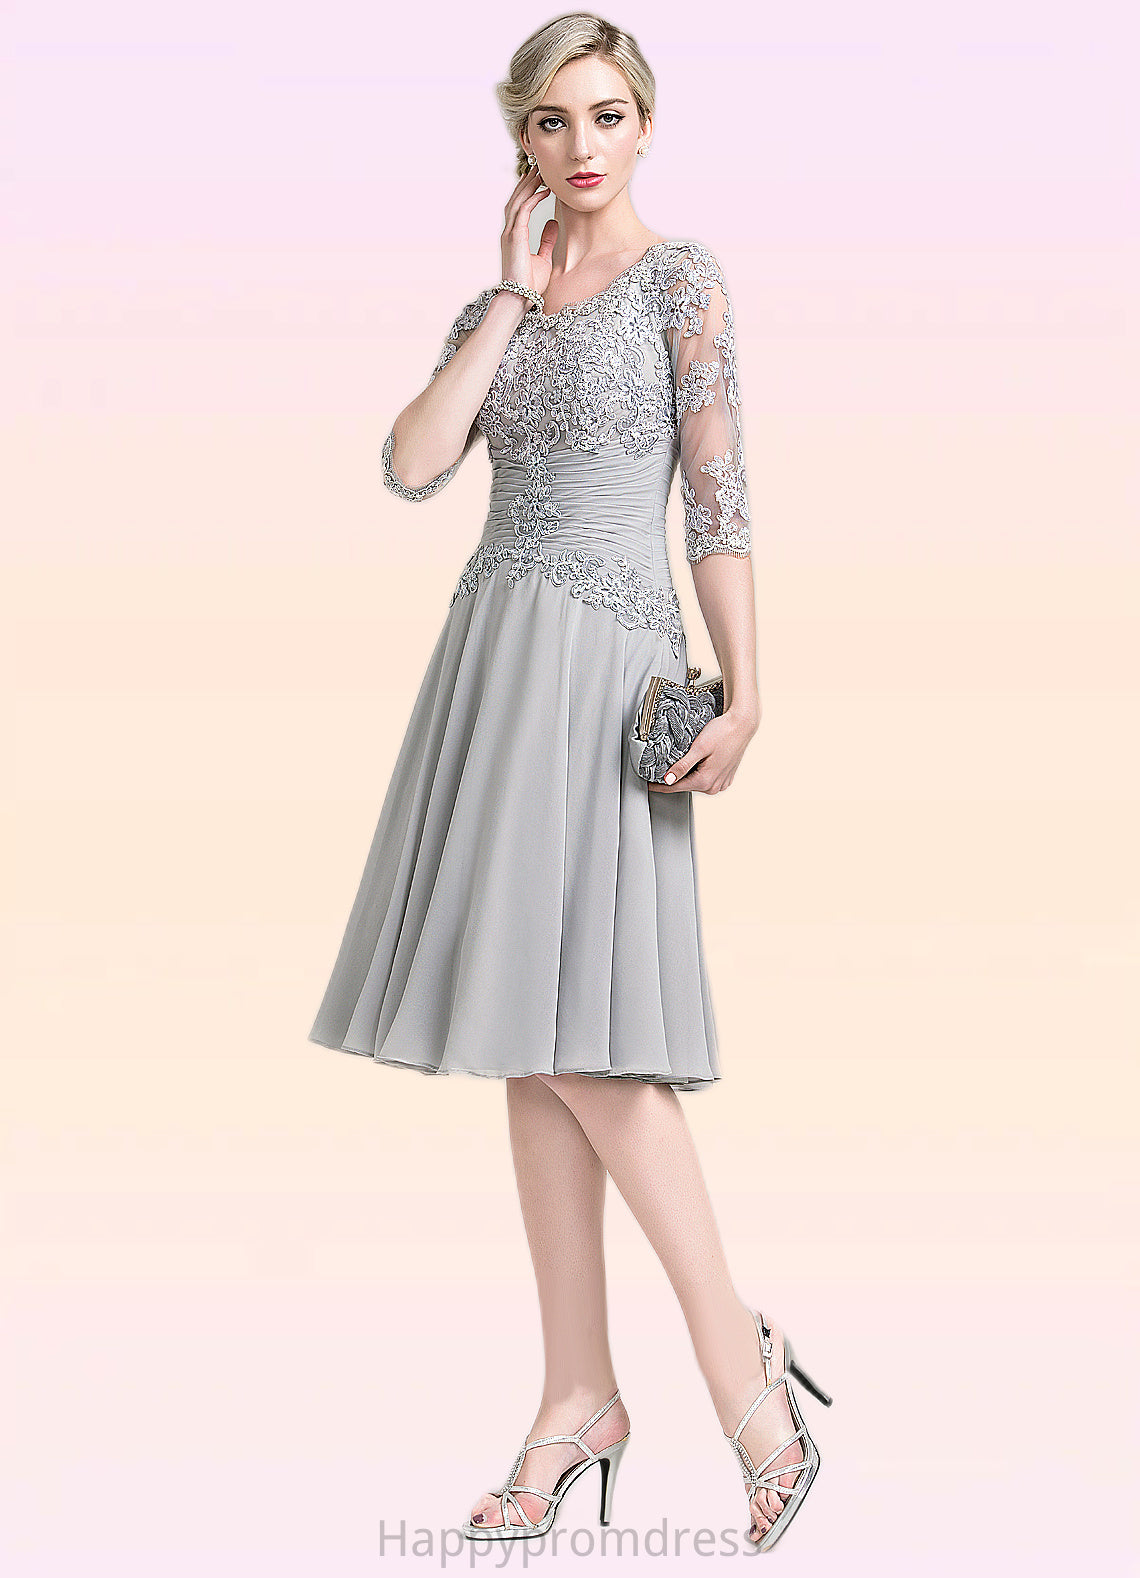 Isabella A-Line Scoop Neck Knee-Length Chiffon Mother of the Bride Dress With Ruffle Appliques Lace XXS126P0014715